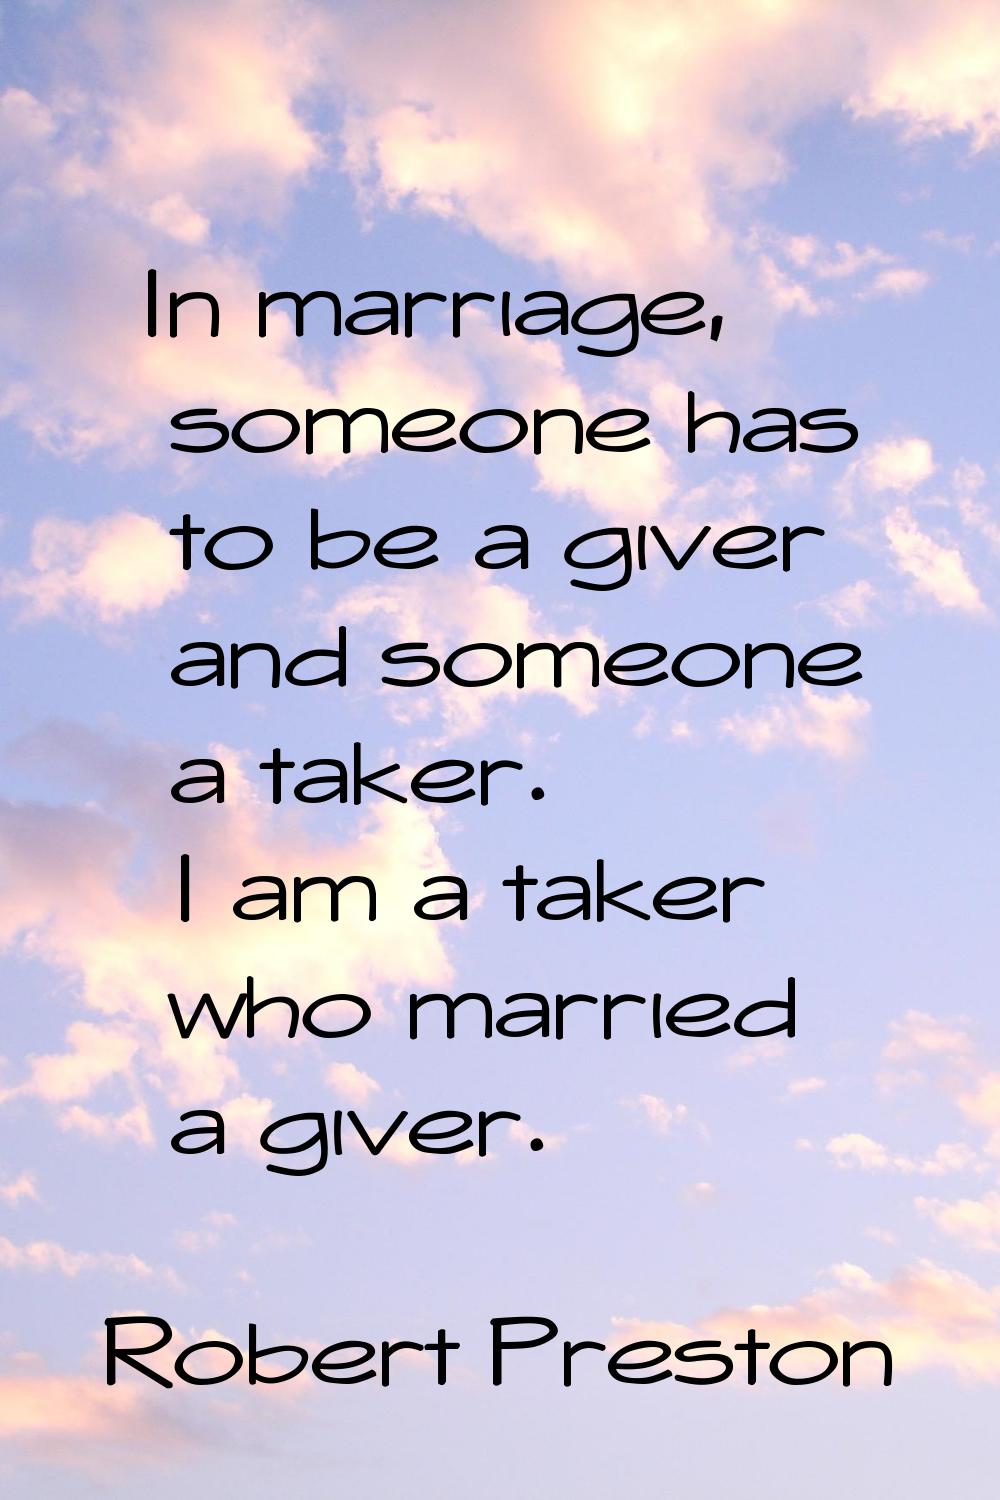 In marriage, someone has to be a giver and someone a taker. I am a taker who married a giver.